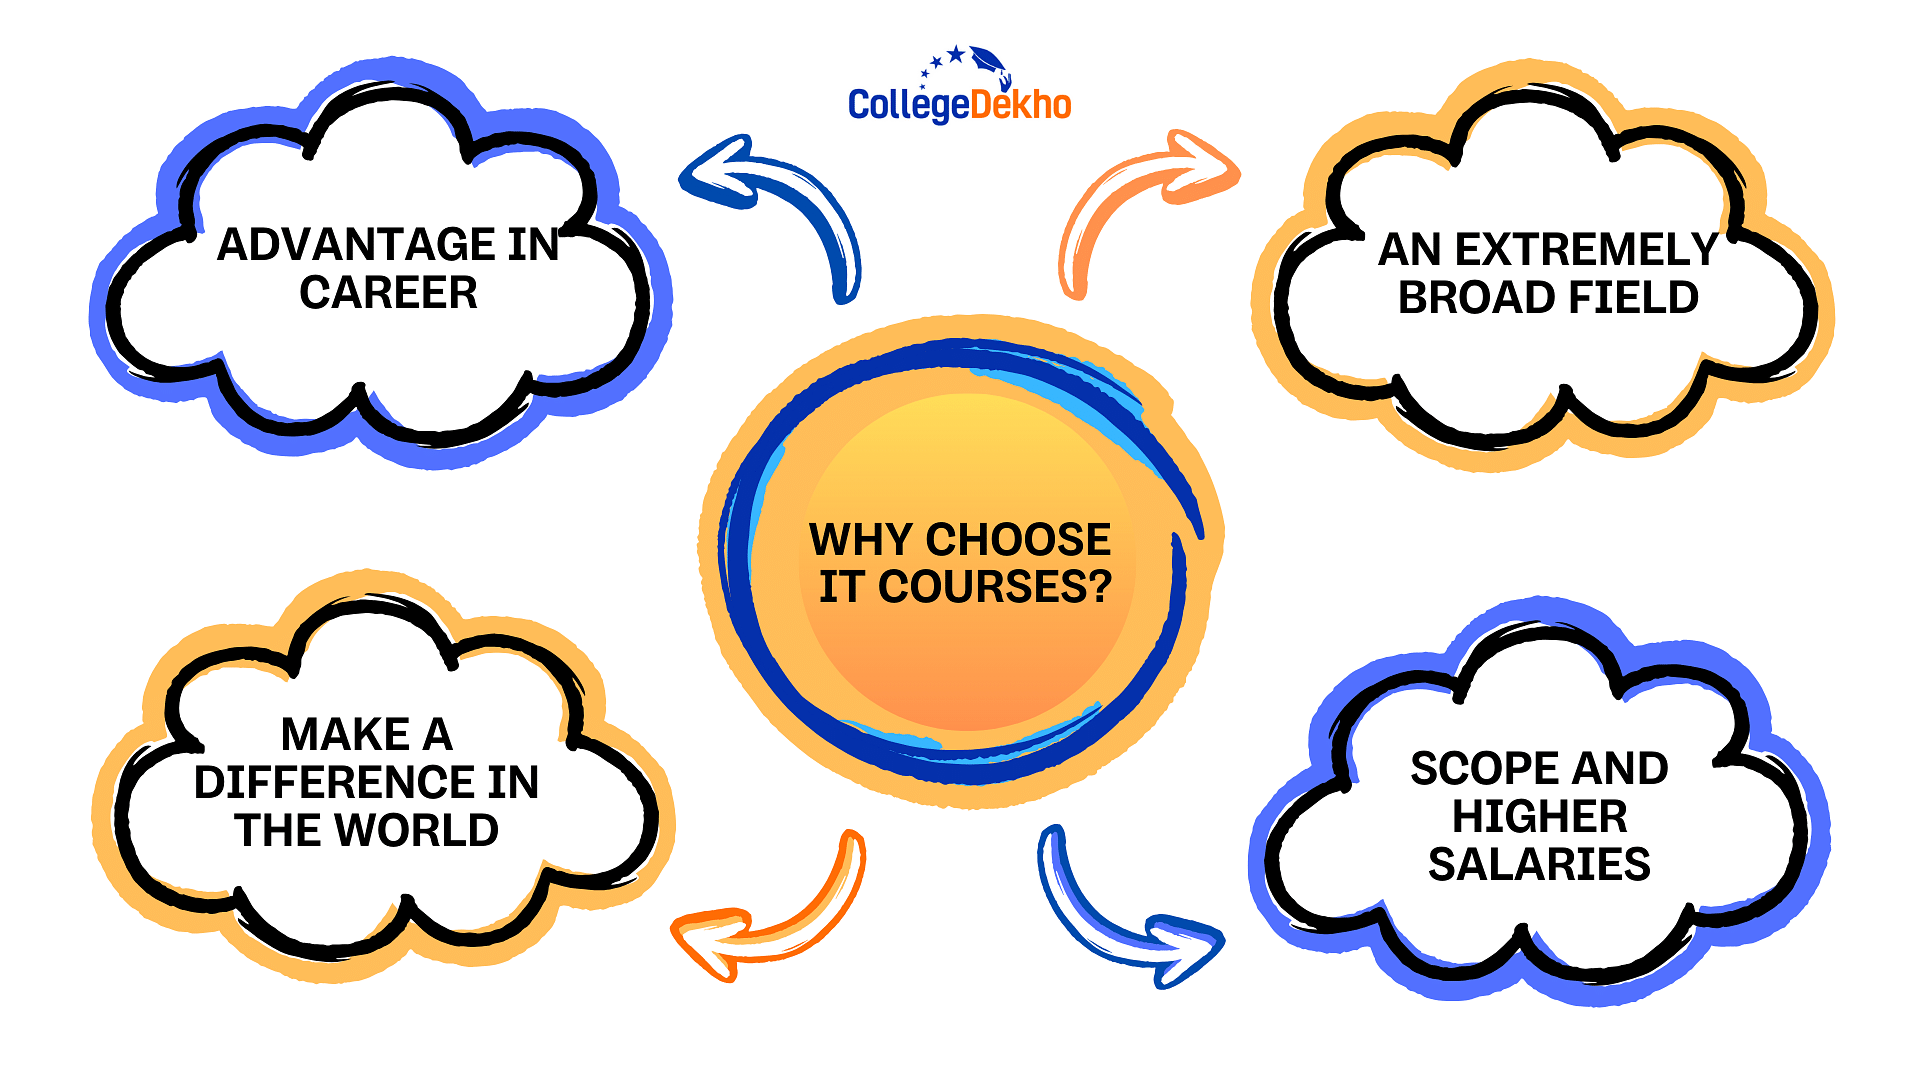 Why Choose IT Courses?